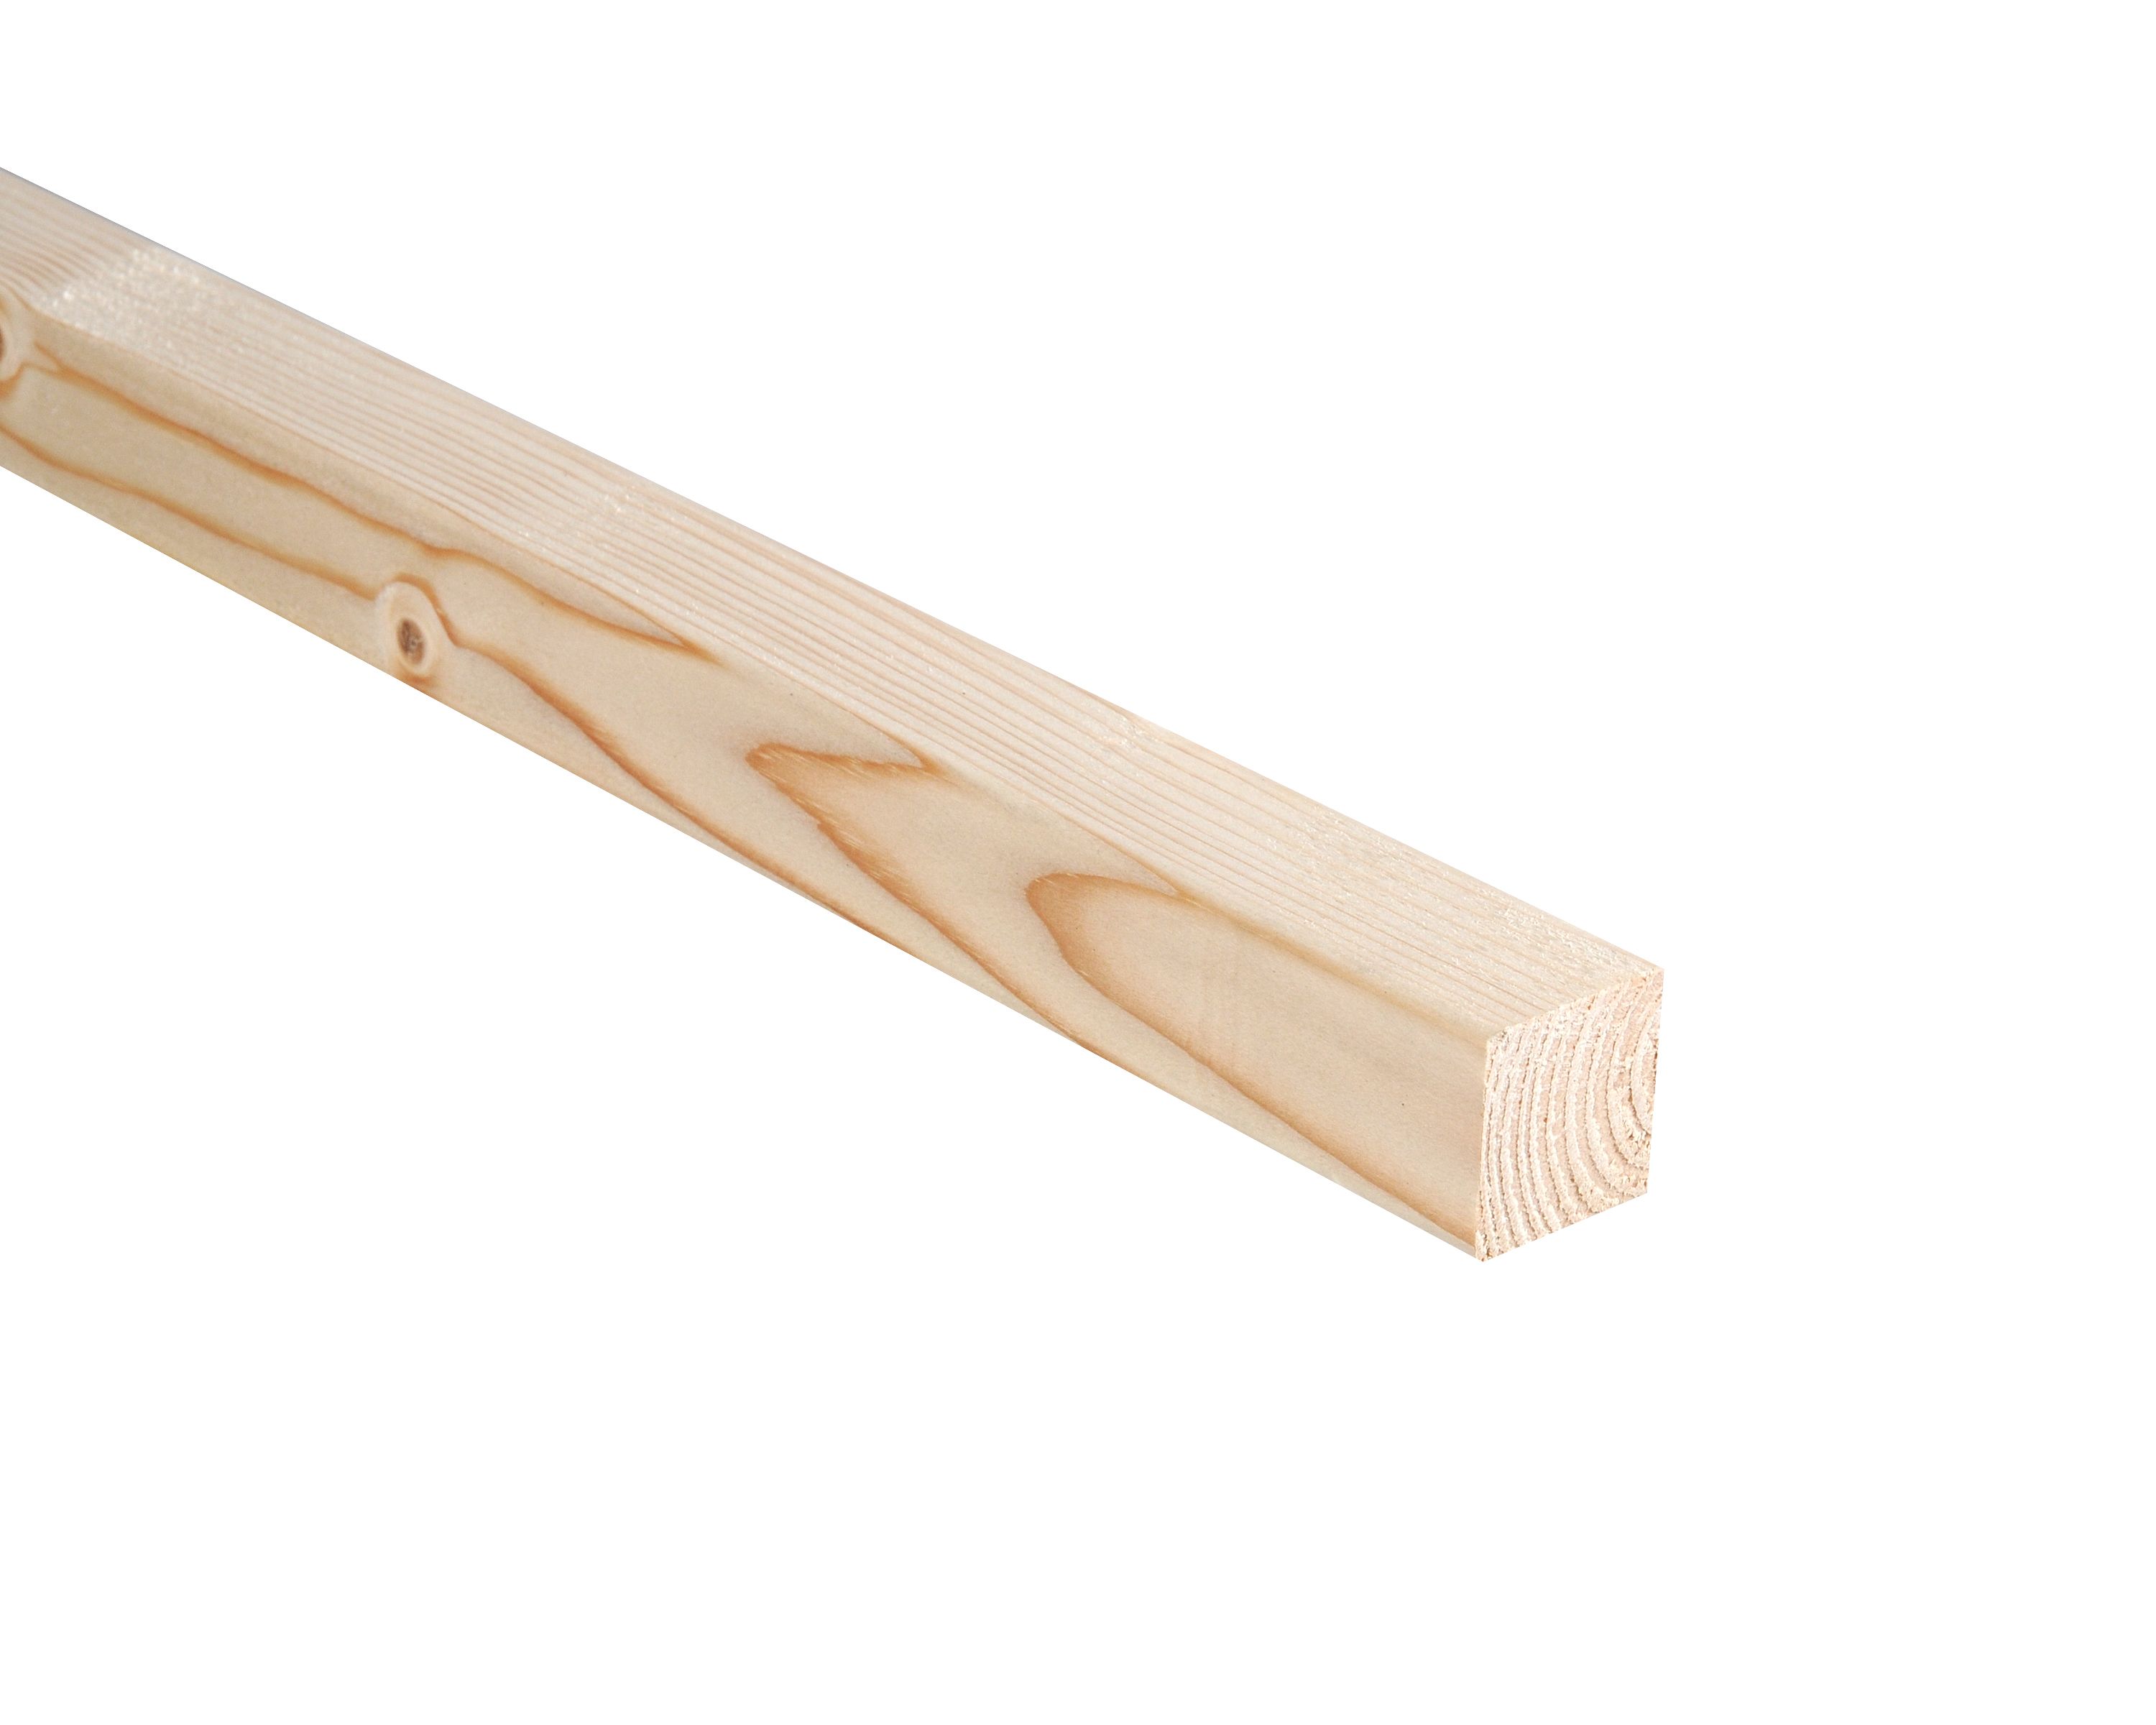 Smooth Planed Square edge Whitewood spruce Stick timber (L)2.4m (W)44mm (T)27mm, Pack of 8